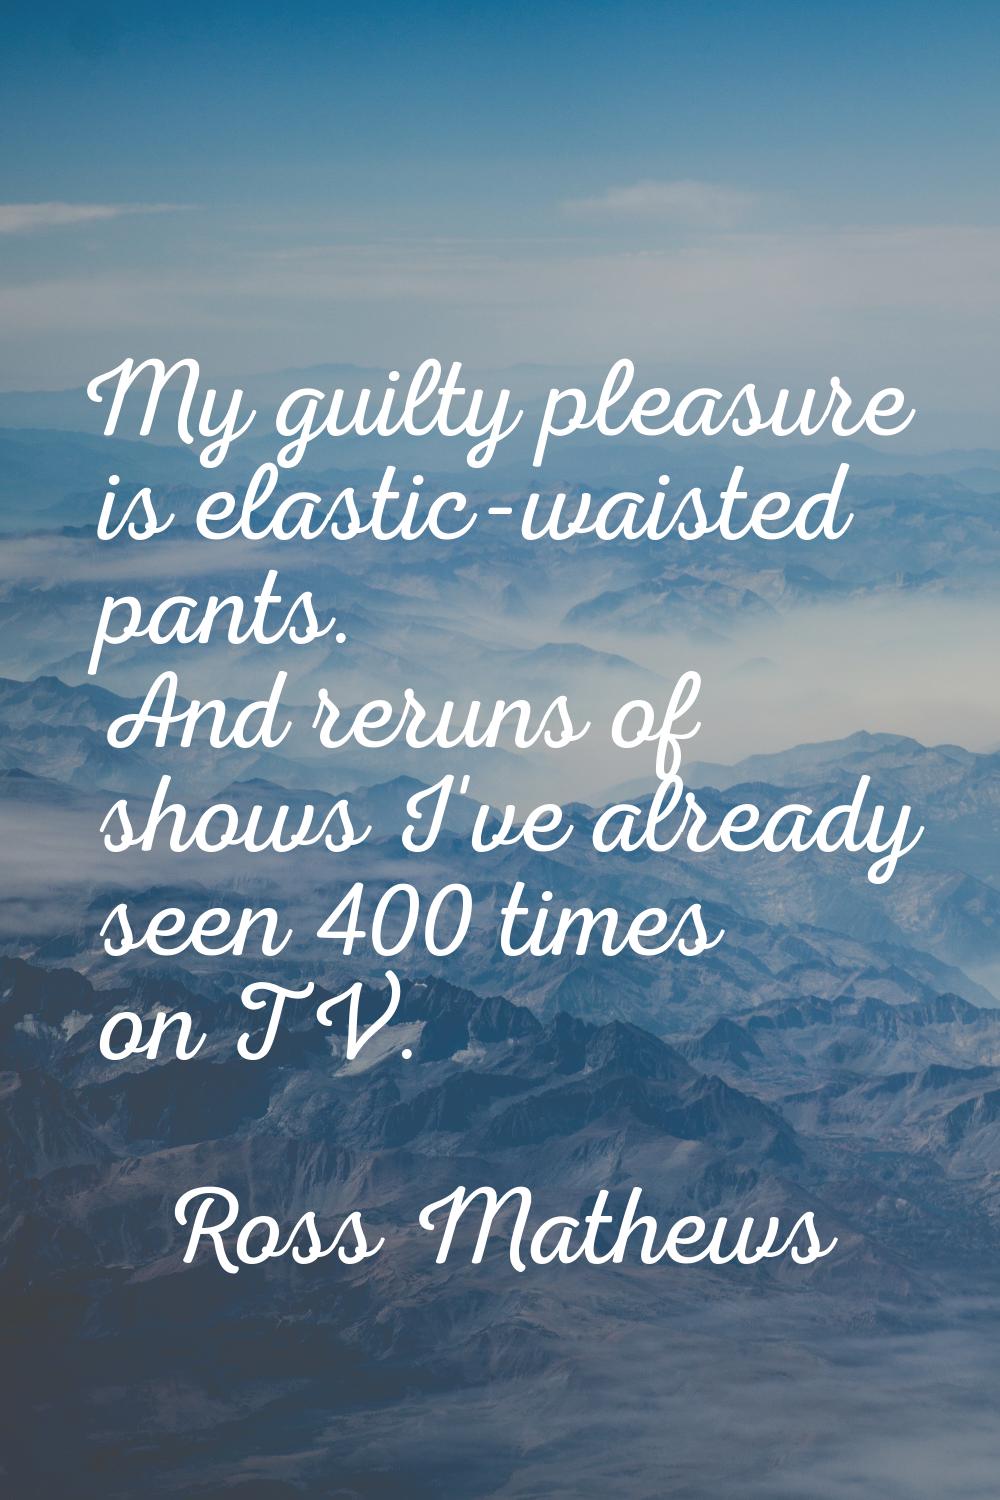 My guilty pleasure is elastic-waisted pants. And reruns of shows I've already seen 400 times on TV.